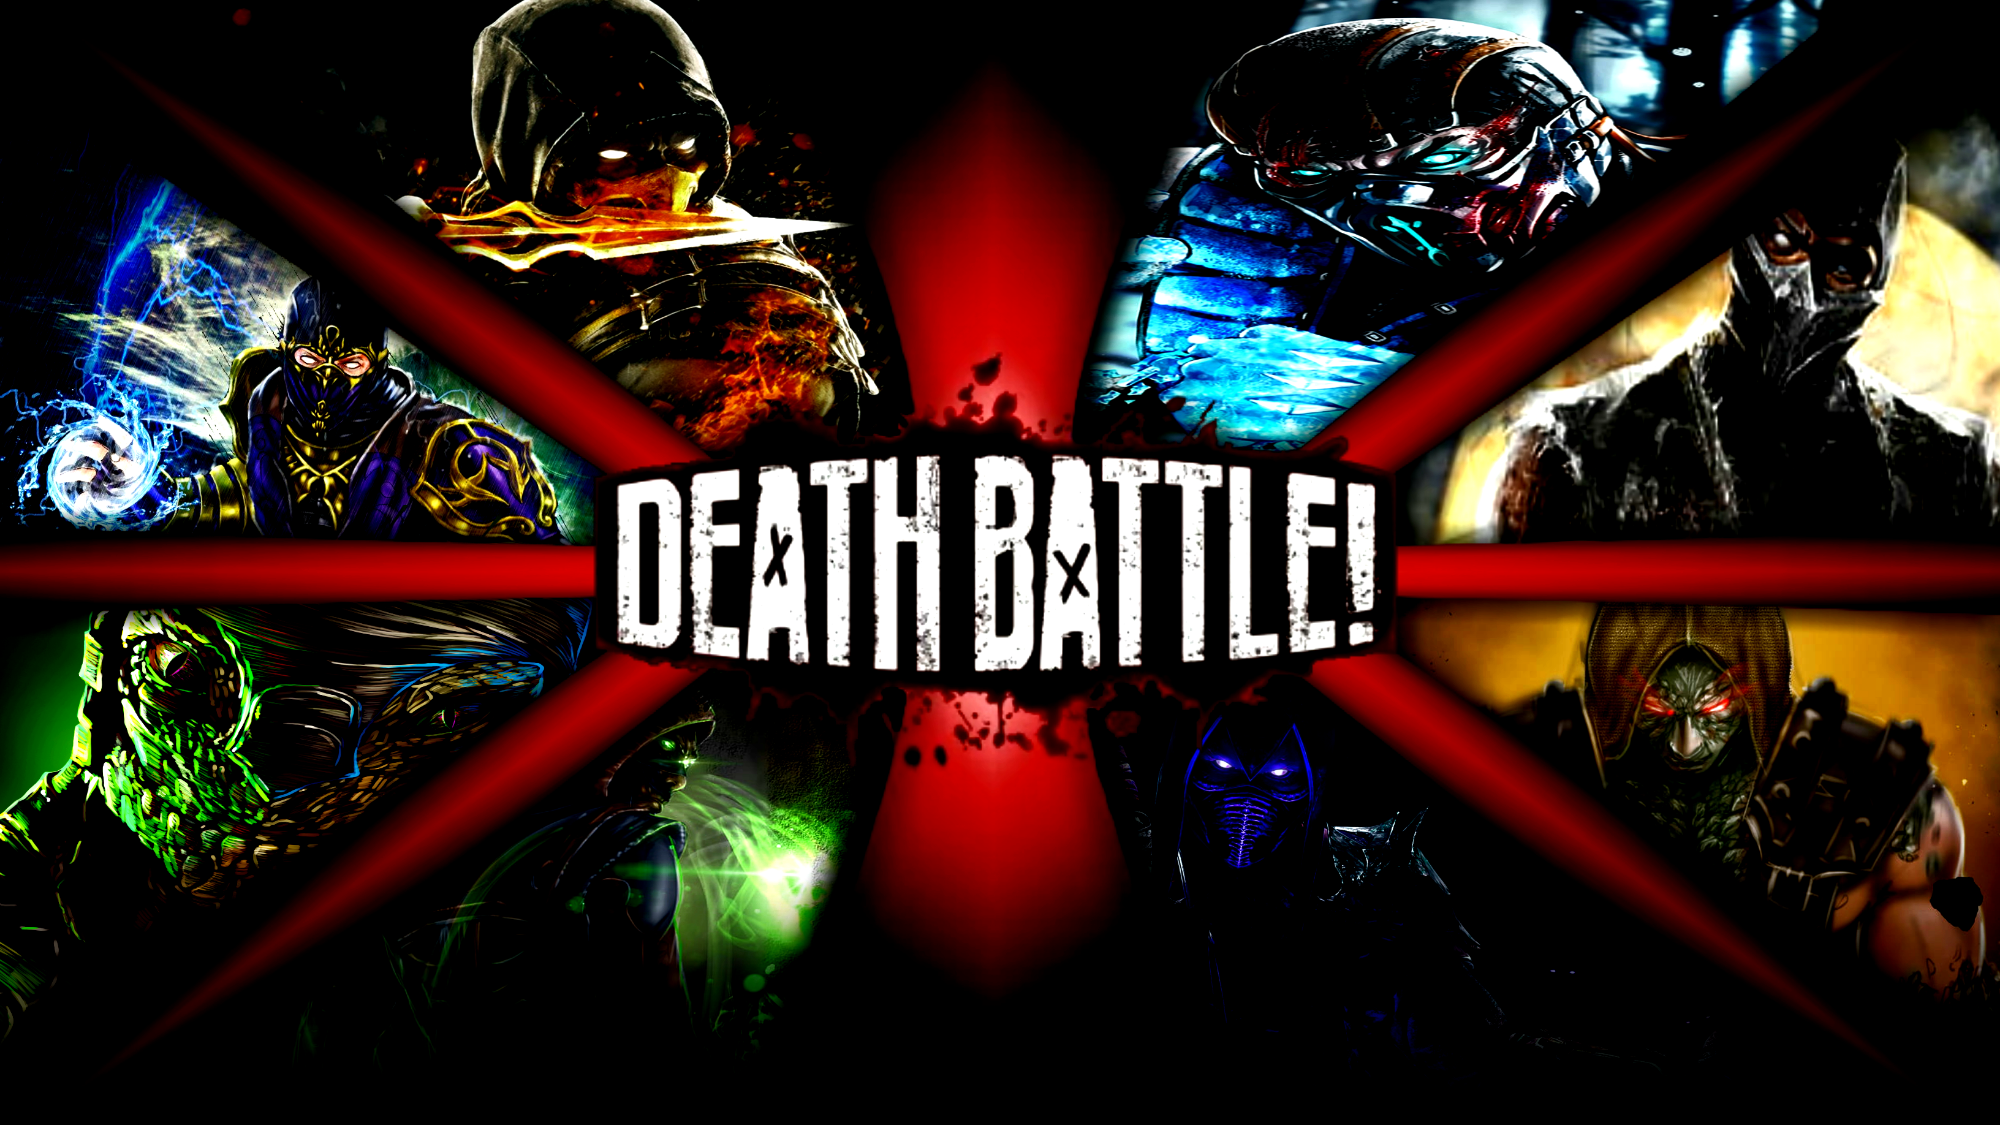 WHAT ARE YOURE THOGHTS ON THIS MU (MORTAL KOMBAT NINJA BATTLE ROYALE ...